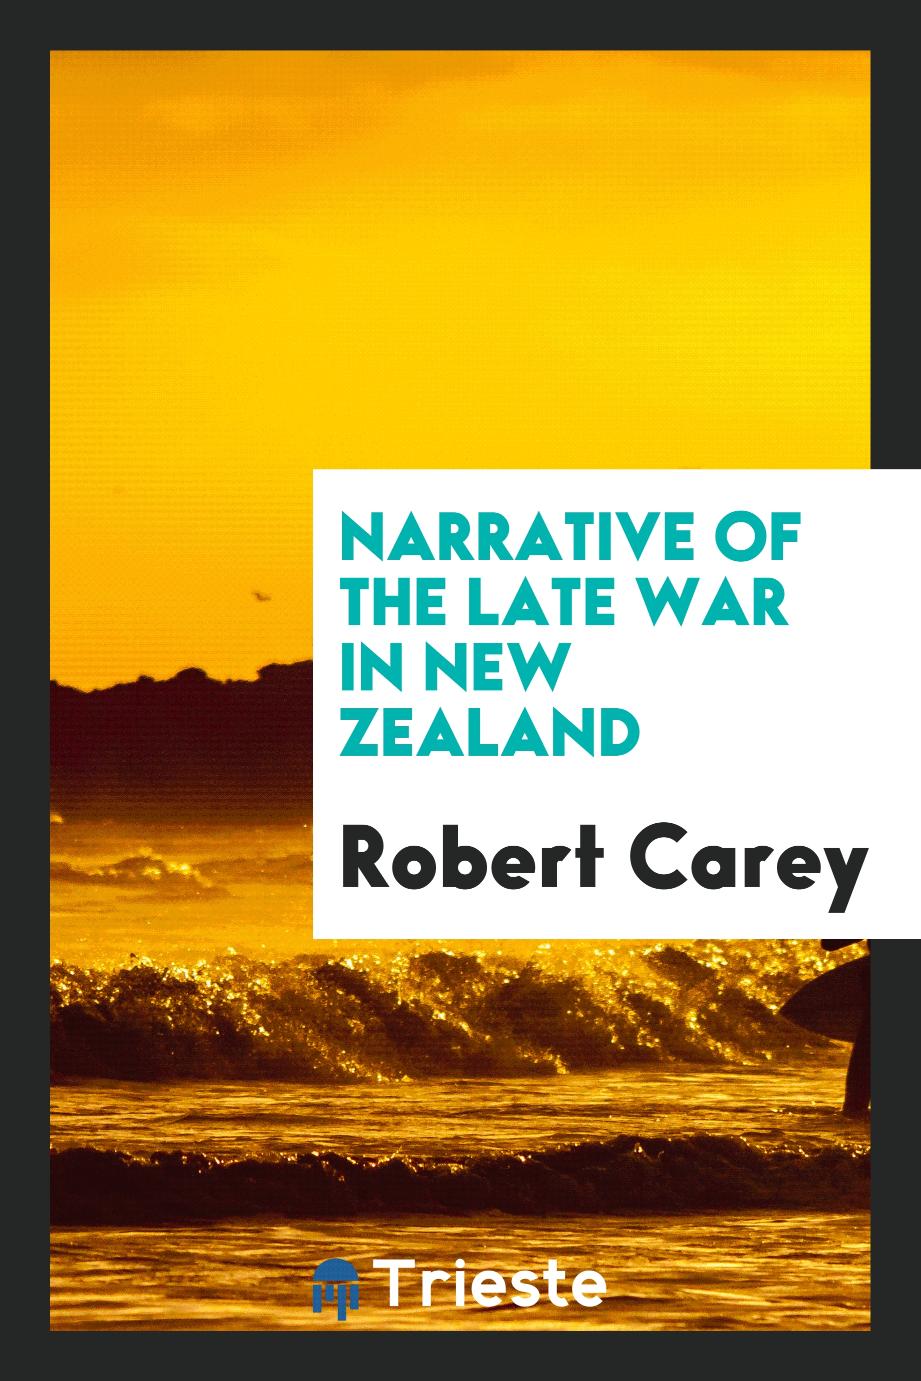 Narrative of the late war in New Zealand